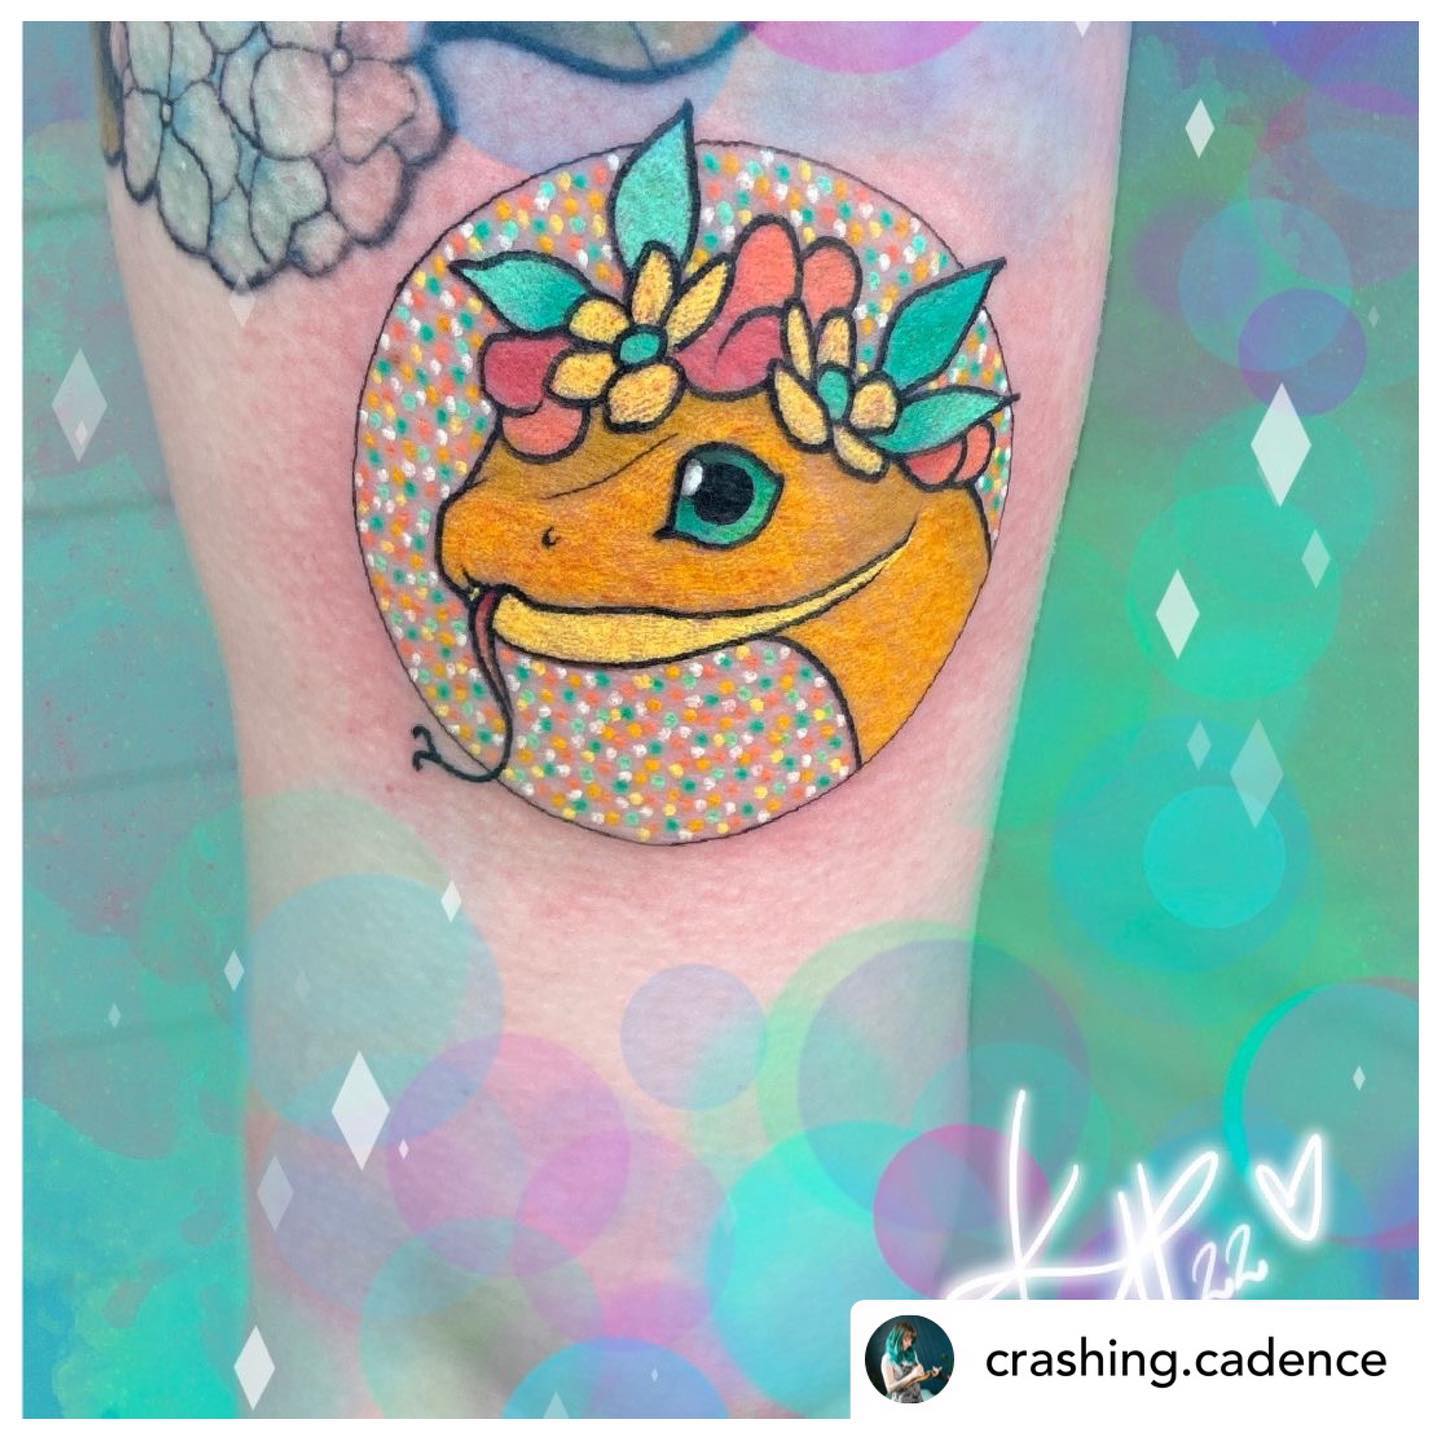 Did you know that @crashing.cadence does a semi regular guest spot with us? Link in bio to book. 🦖